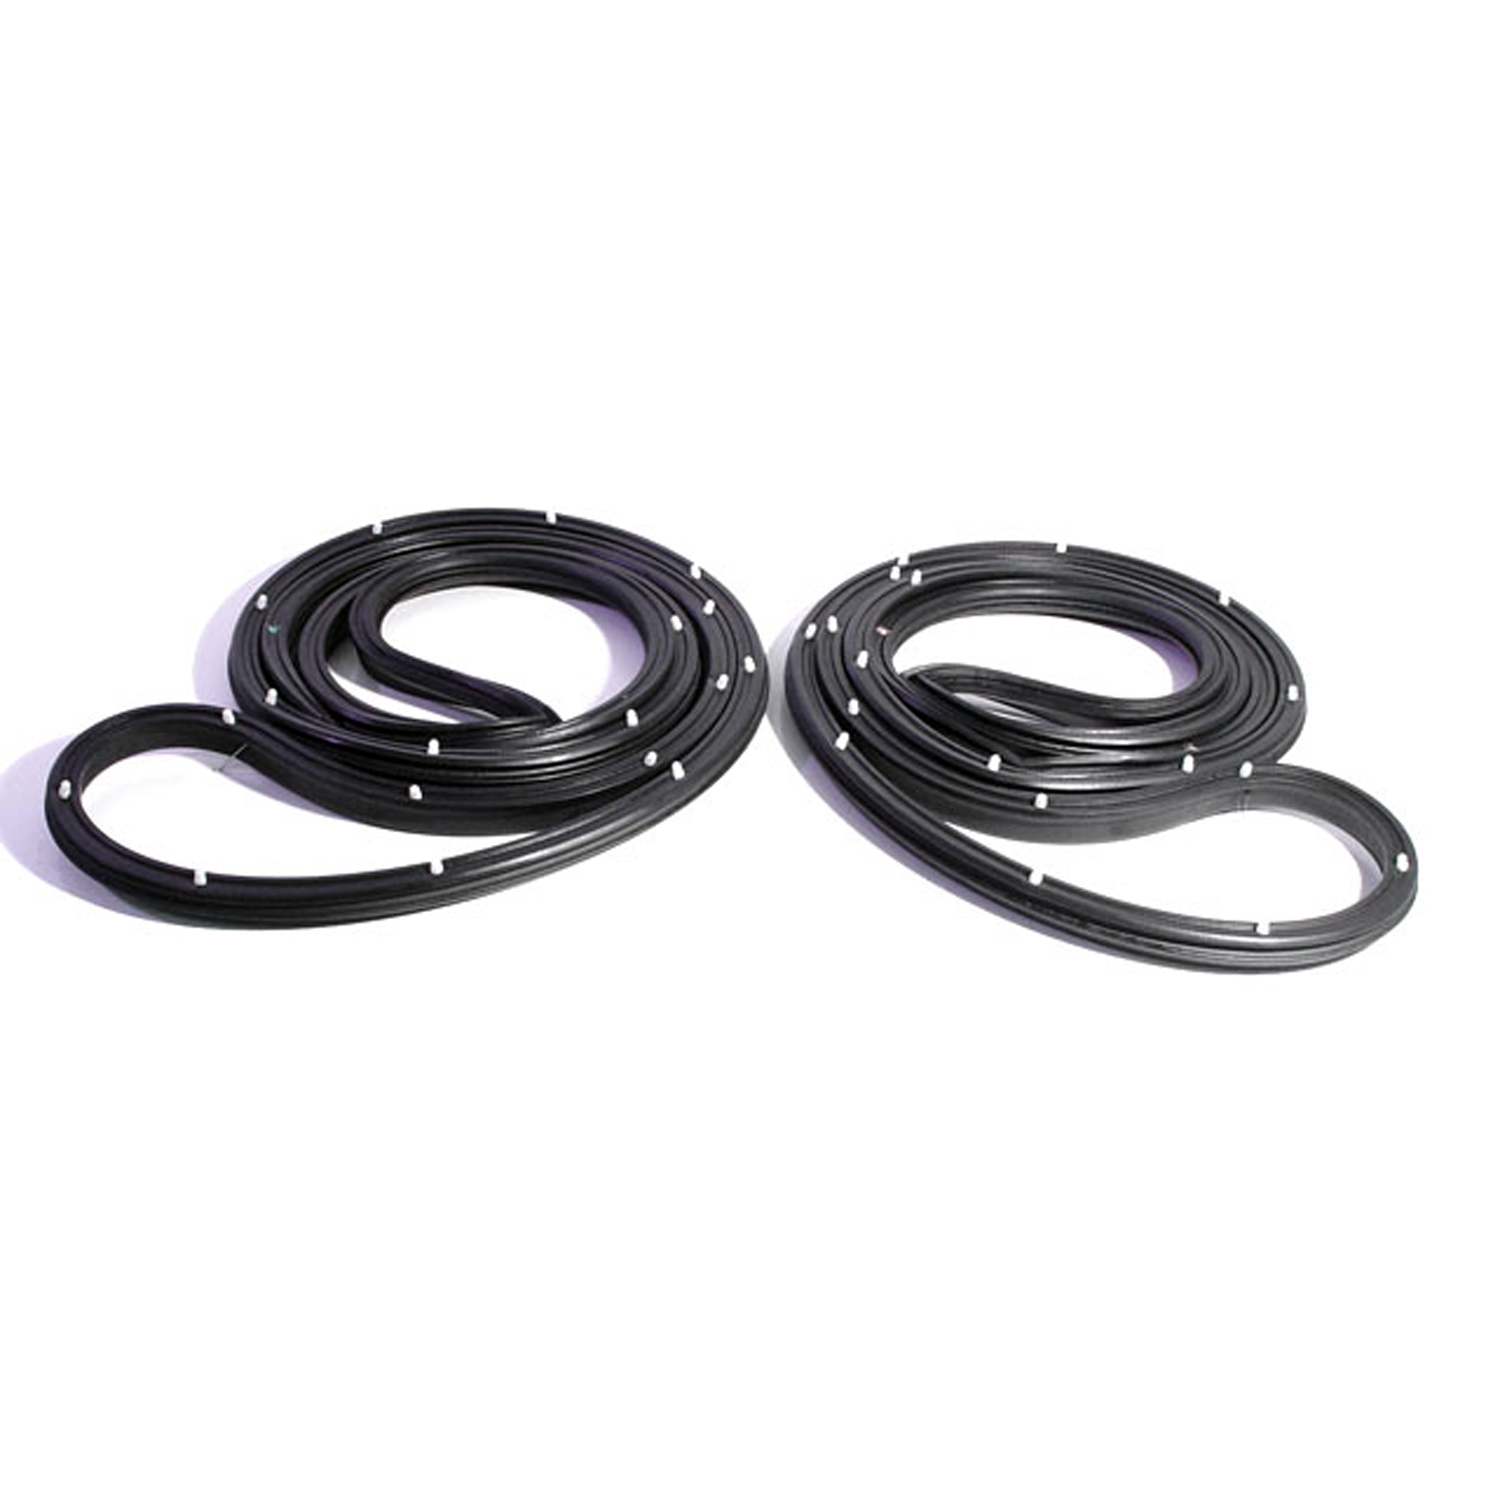 1966 Buick Sportwagon Rear Molded Door Seals with Clips.  For 4-door station wagon-LM 12-QC